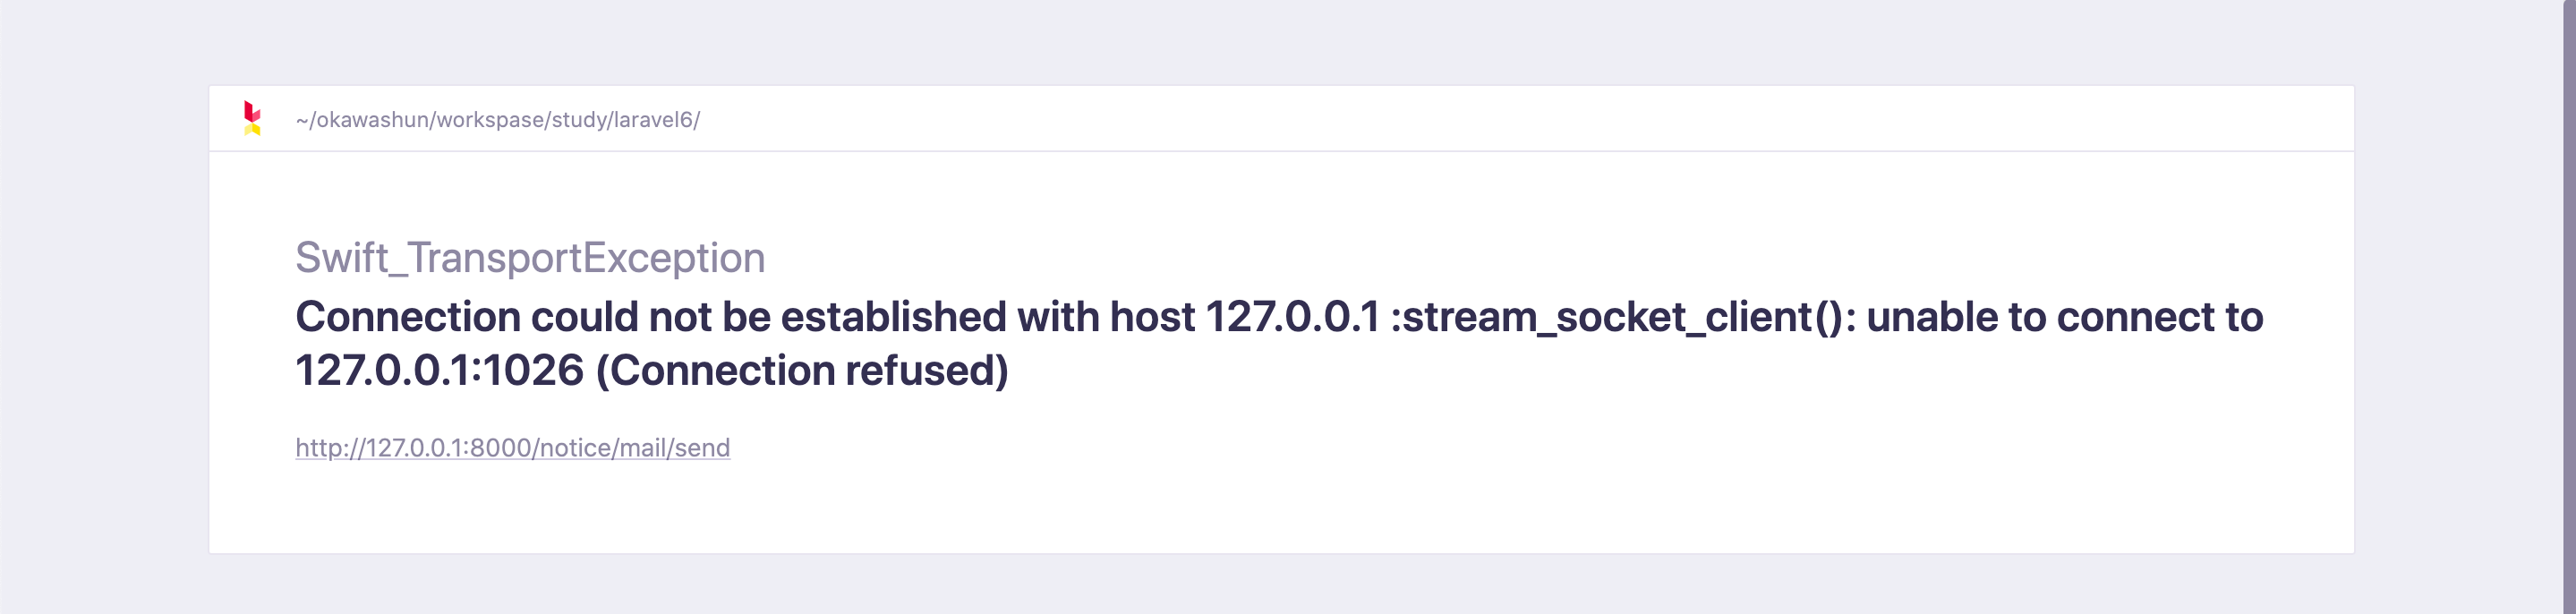 🧨_Connection_could_not_be_established_with_host_127_0_0_1__stream_socket_client____unable_to_connect_to_127_0_0_1_1026__Connection_refused_.png